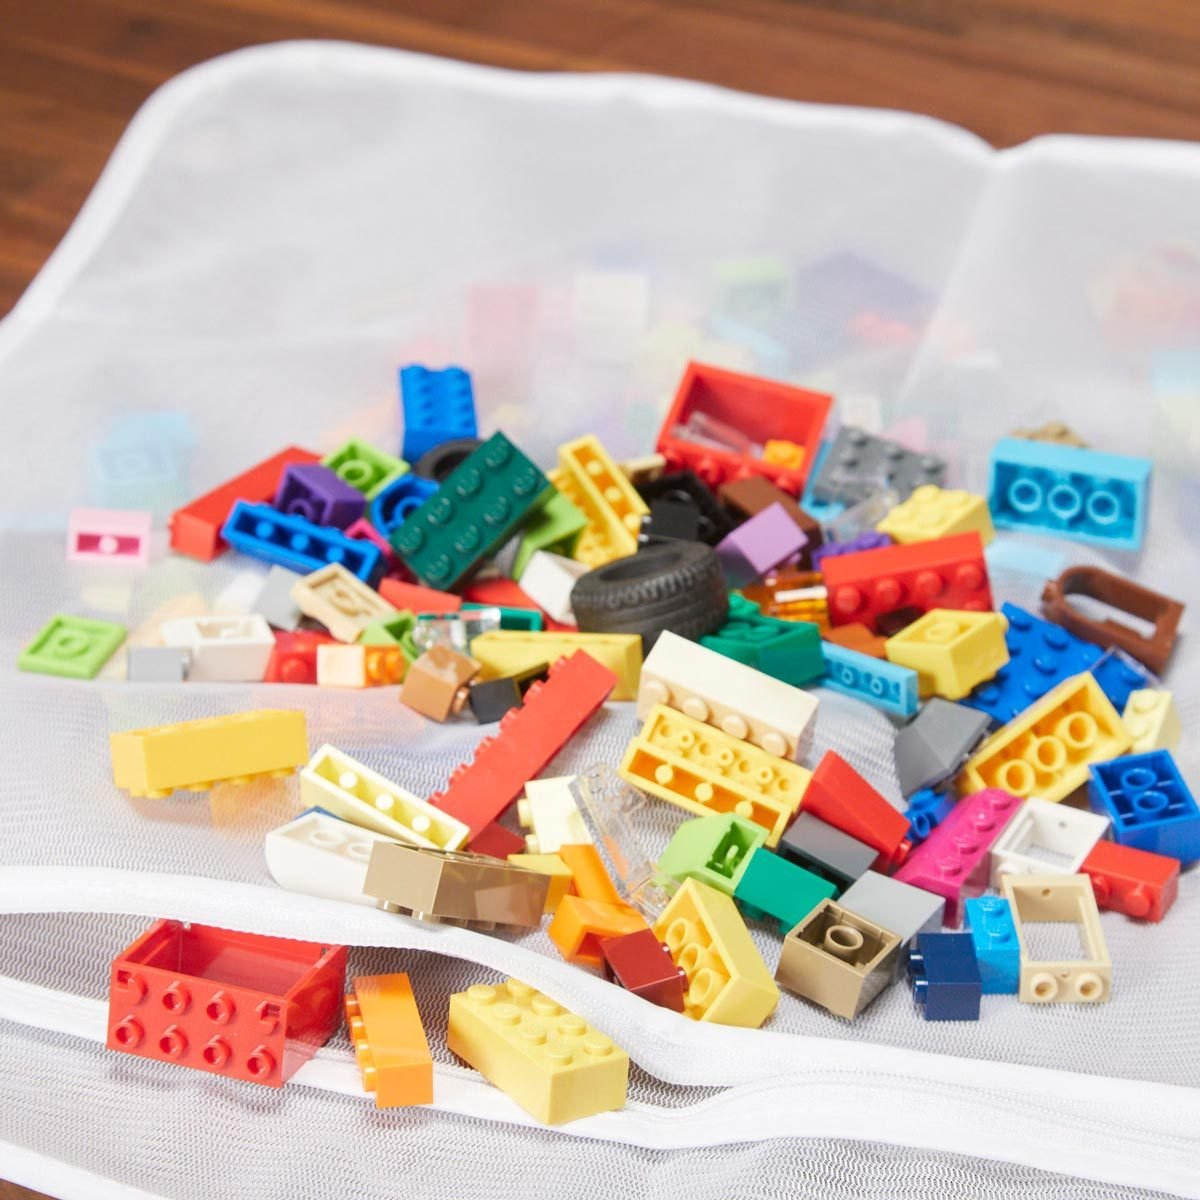 The Quickest and Easiest Way to Clean Legos